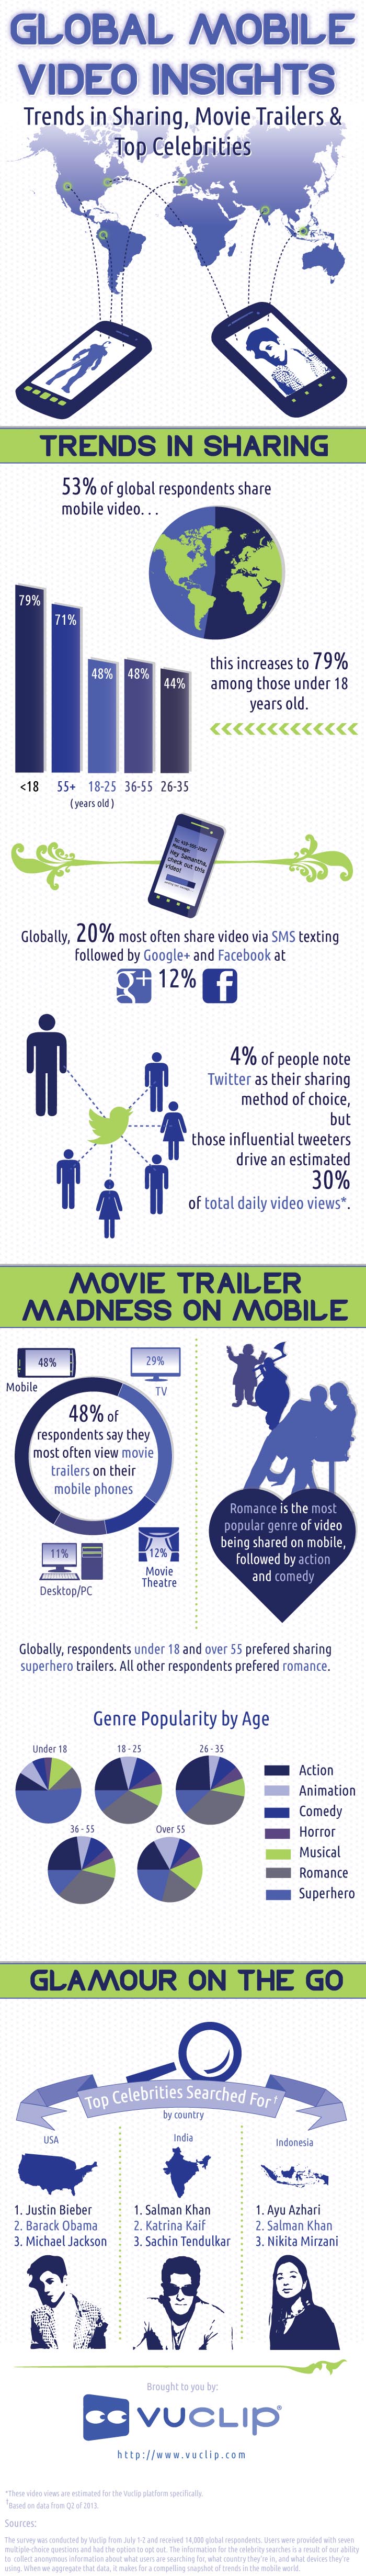 Global Mobile Video Insights